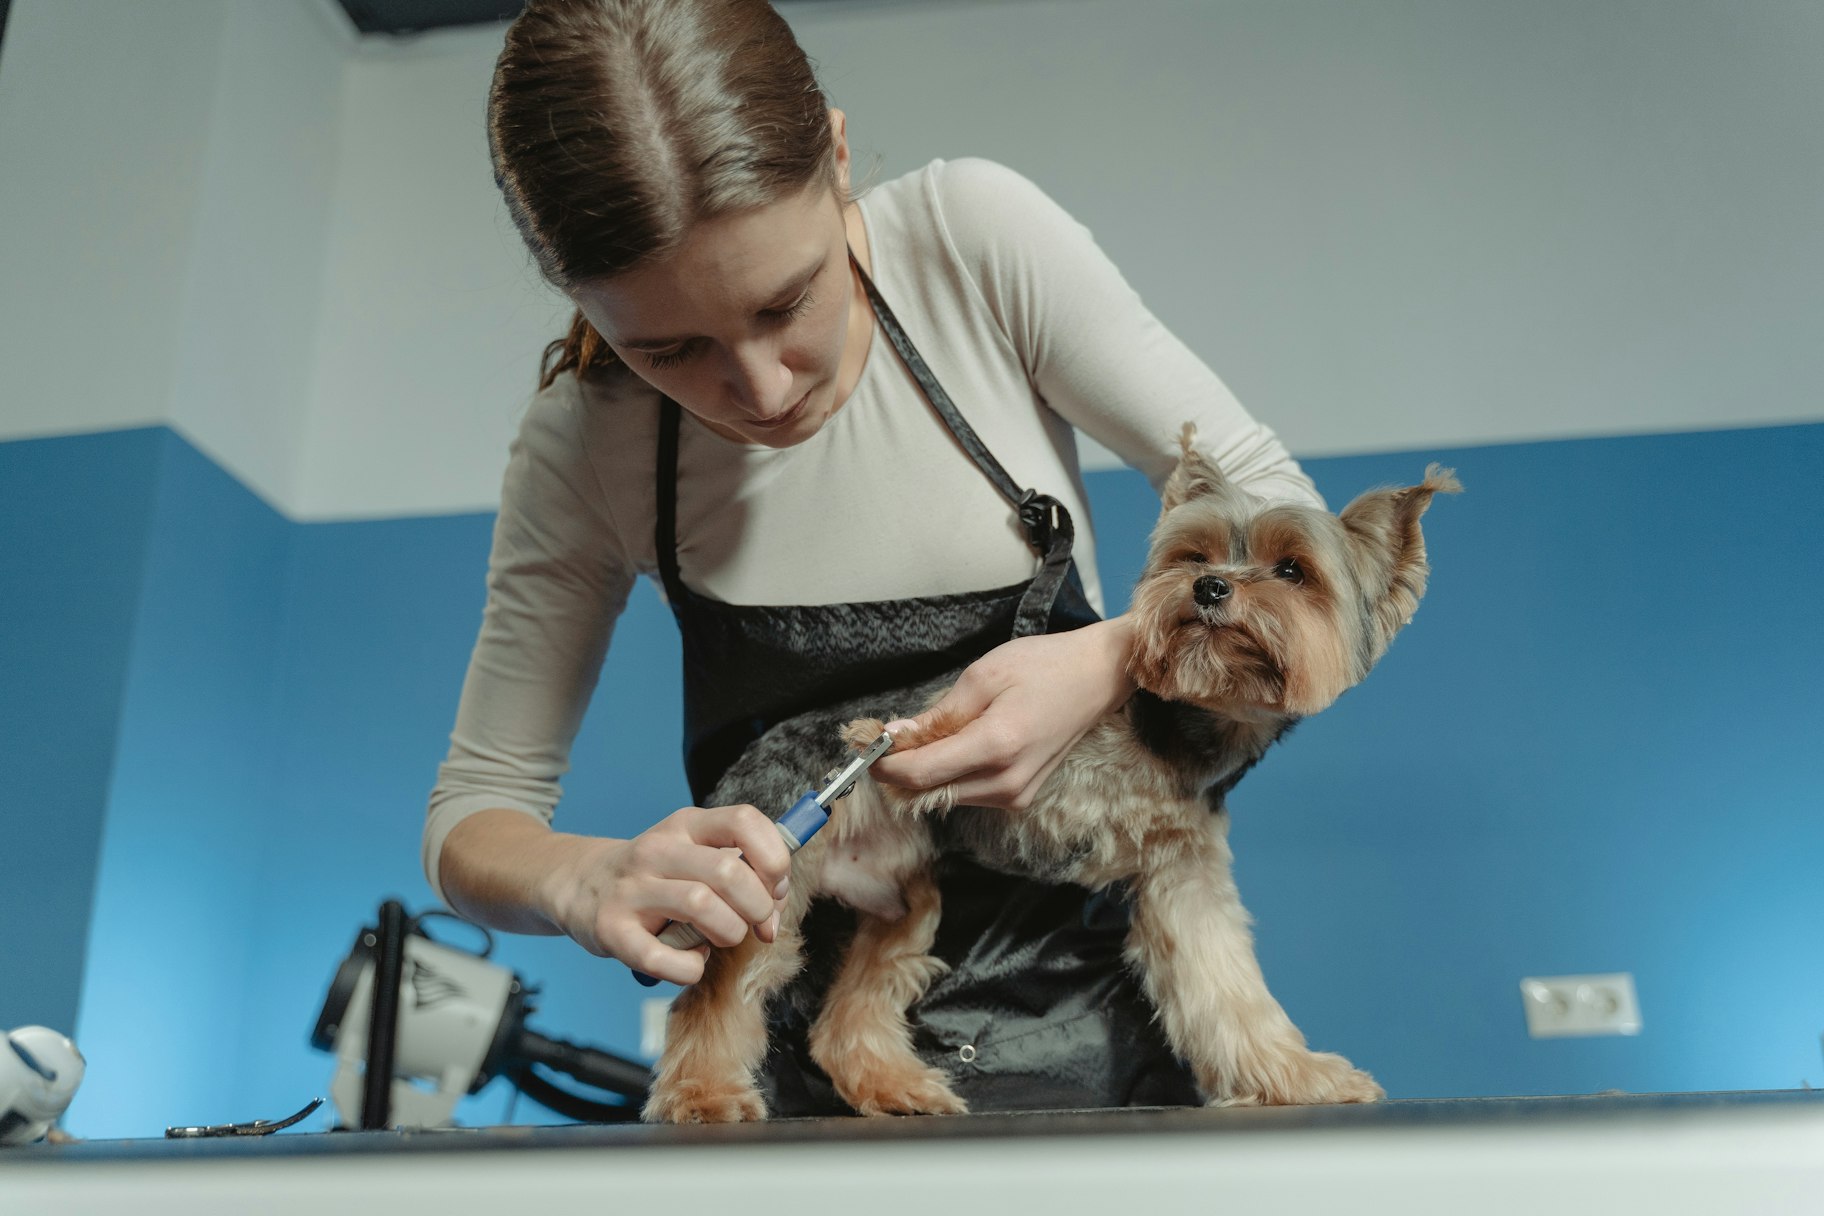 home business oppportunity: dog grooming